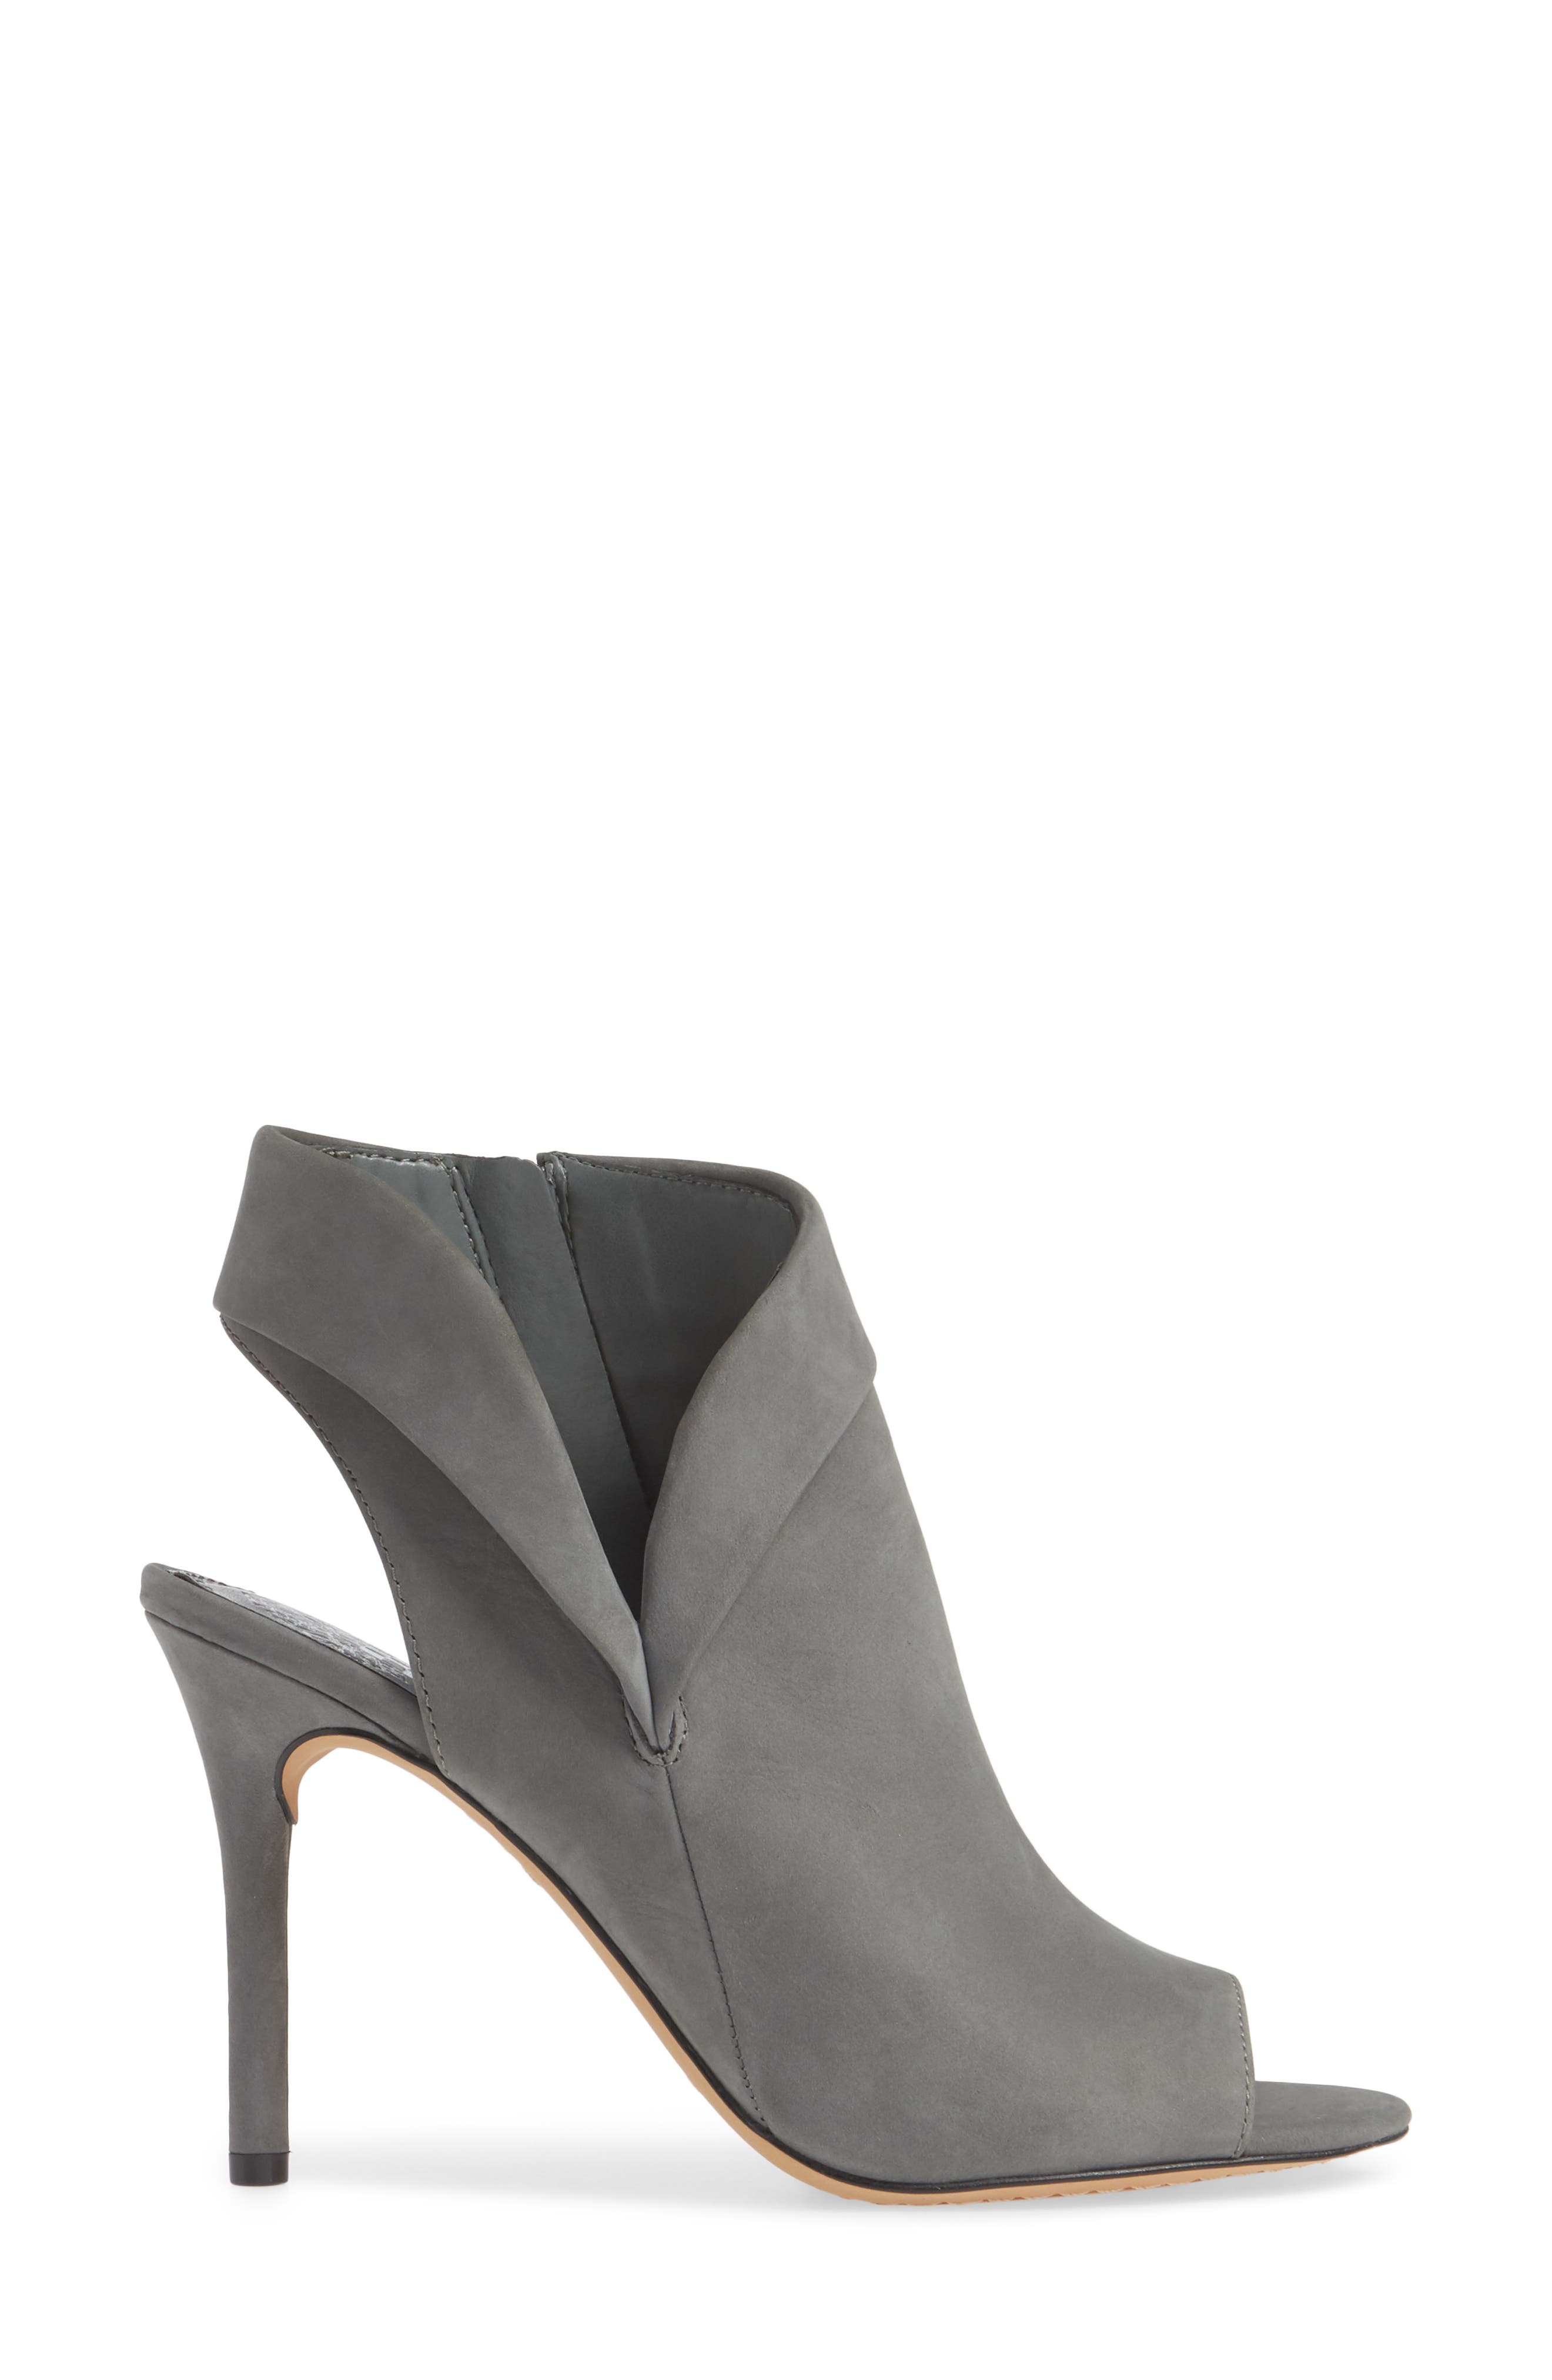 vince camuto cholia bootie